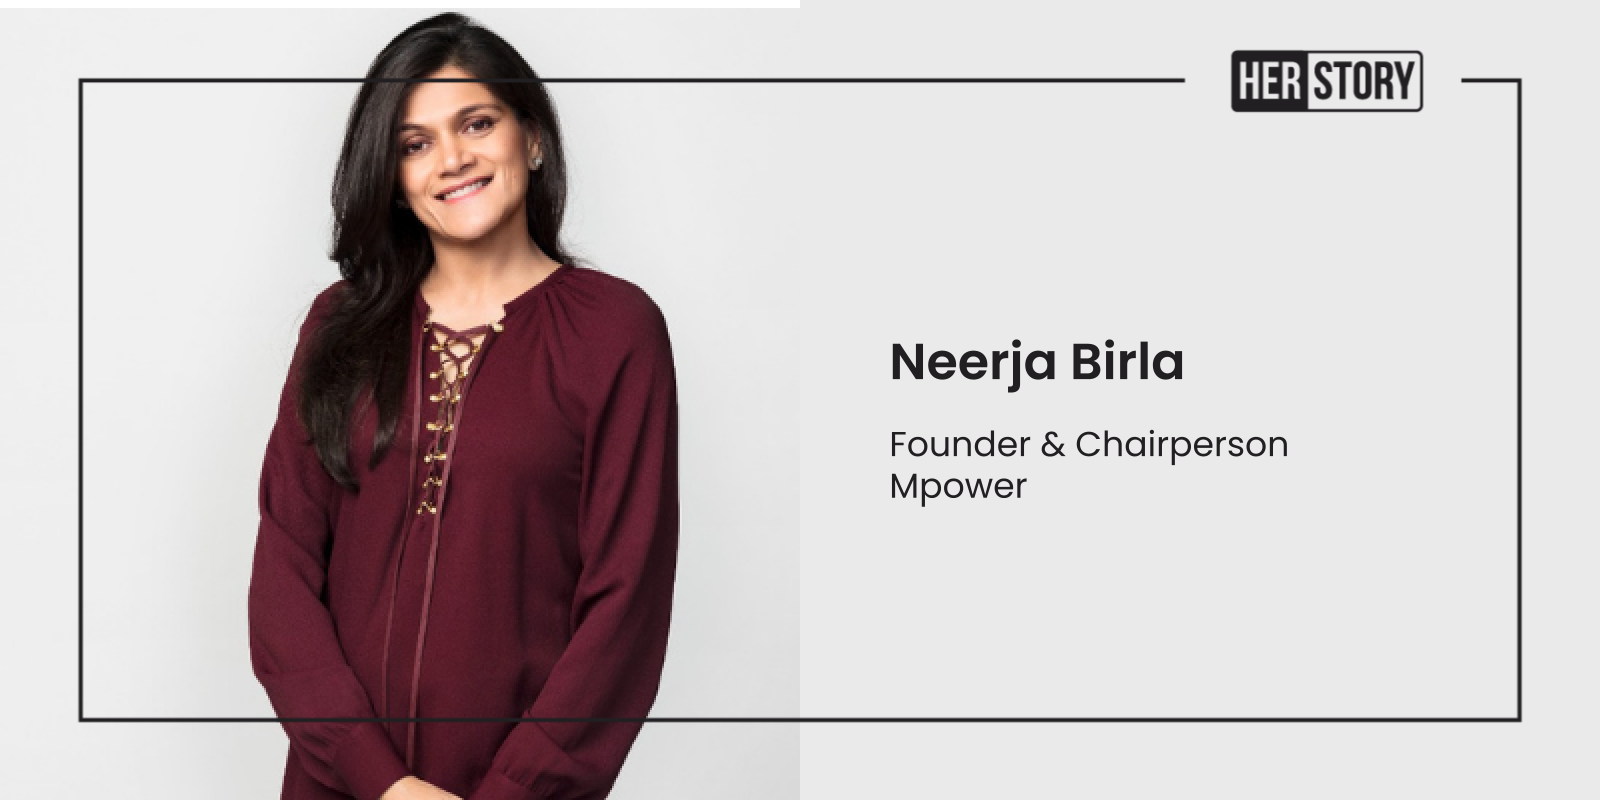 [HerStory Conversations] “Self-love is not selfish and we need to look after ourselves too,” says Neerja Birla of Mpower
